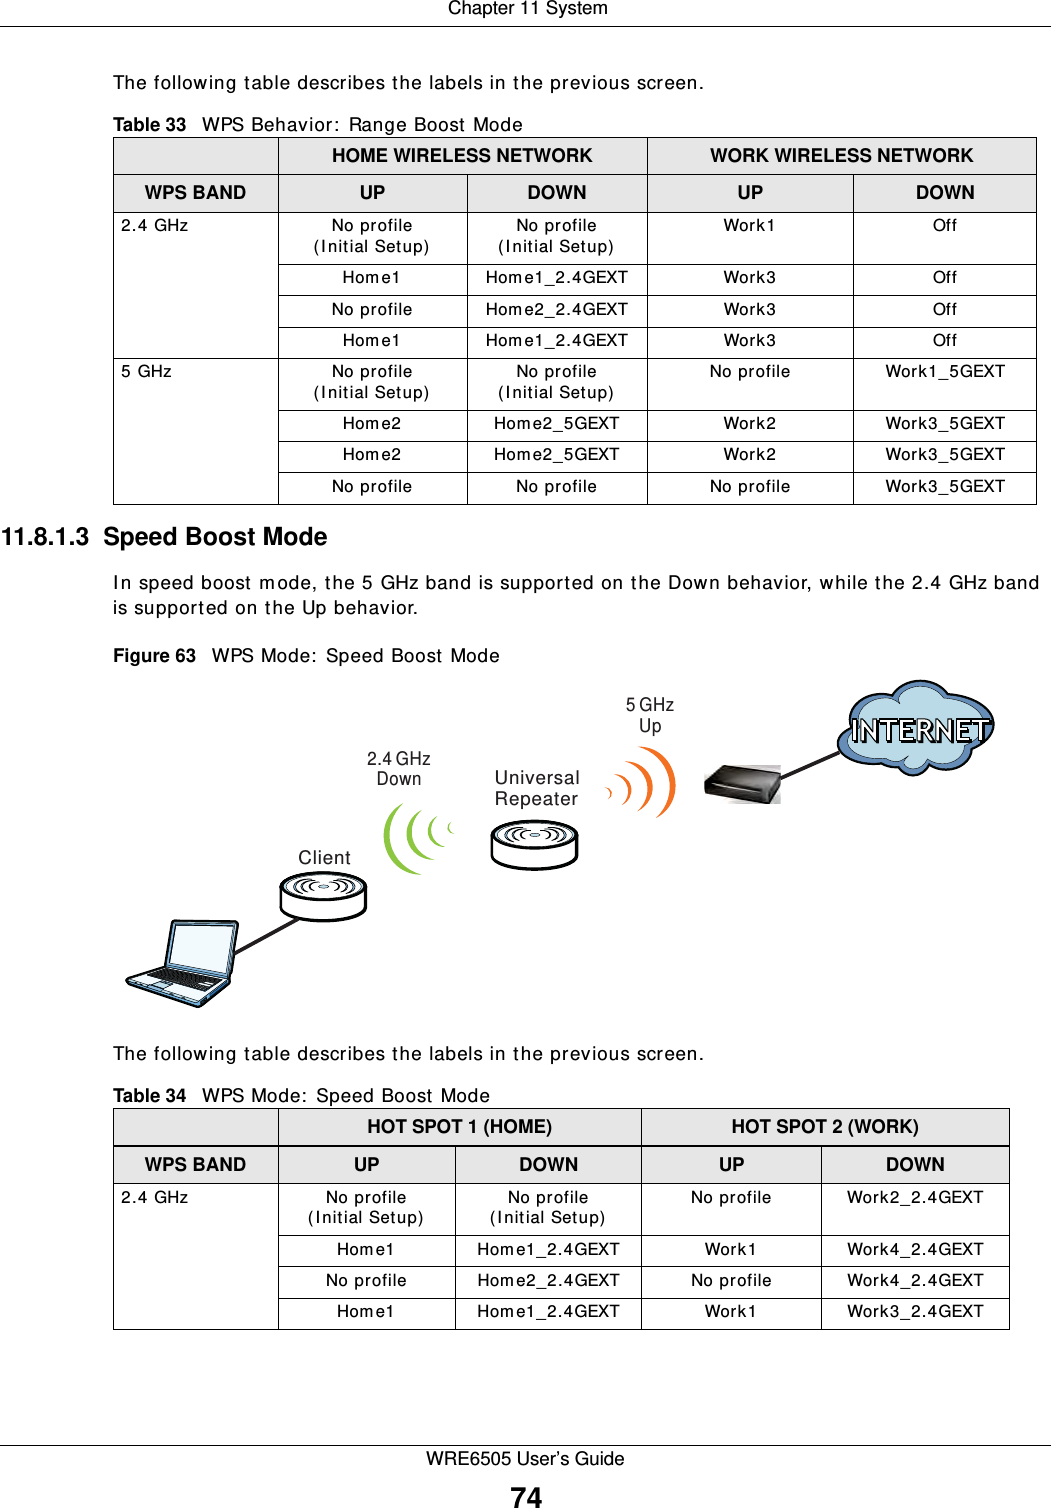  Chapter 11 SystemWRE6505 User’s Guide74The following table describes the labels in the previous screen.11.8.1.3  Speed Boost ModeIn speed boost mode, the 5 GHz band is supported on the Down behavior, while the 2.4 GHz band is supported on the Up behavior.Figure 63   WPS Mode:  Speed Boost Mode The following table describes the labels in the previous screen.Table 33   WPS Behavior:  Range Boost ModeHOME WIRELESS NETWORK WORK WIRELESS NETWORKWPS BAND UP DOWN UP DOWN2.4 GHz No profile(Initial Setup)No profile(Initial Setup)Work1 OffHom e1 Hom e1_2.4GEXT Work3 OffNo profile Home2_2.4GEXT Work3 OffHom e1 Hom e1_2.4GEXT Work3 Off5 GHz No profile(Initial Setup)No profile(Initial Setup)No profile Work1_5GEXTHom e2 Hom e2_5GEXT Work2 Work3_5GEXTHom e2 Hom e2_5GEXT Work2 Work3_5GEXTNo profile No profile No profile Work3_5GEXTTable 34   WPS Mode:  Speed Boost ModeHOT SPOT 1 (HOME) HOT SPOT 2 (WORK)WPS BAND UP DOWN UP DOWN2.4 GHz No profile(Initial Setup)No profile(Initial Setup)No profile Work2_2.4GEXTHom e1 Hom e1_2.4GEXT Work1 Work4_2.4GEXTNo profile Hom e2_2.4GEXT No profile Work4_2.4GEXTHom e1 Hom e1_2.4GEXT Work1 Work3_2.4GEXTUniversalRepeaterClient5 GHzUp2.4 GHzDown